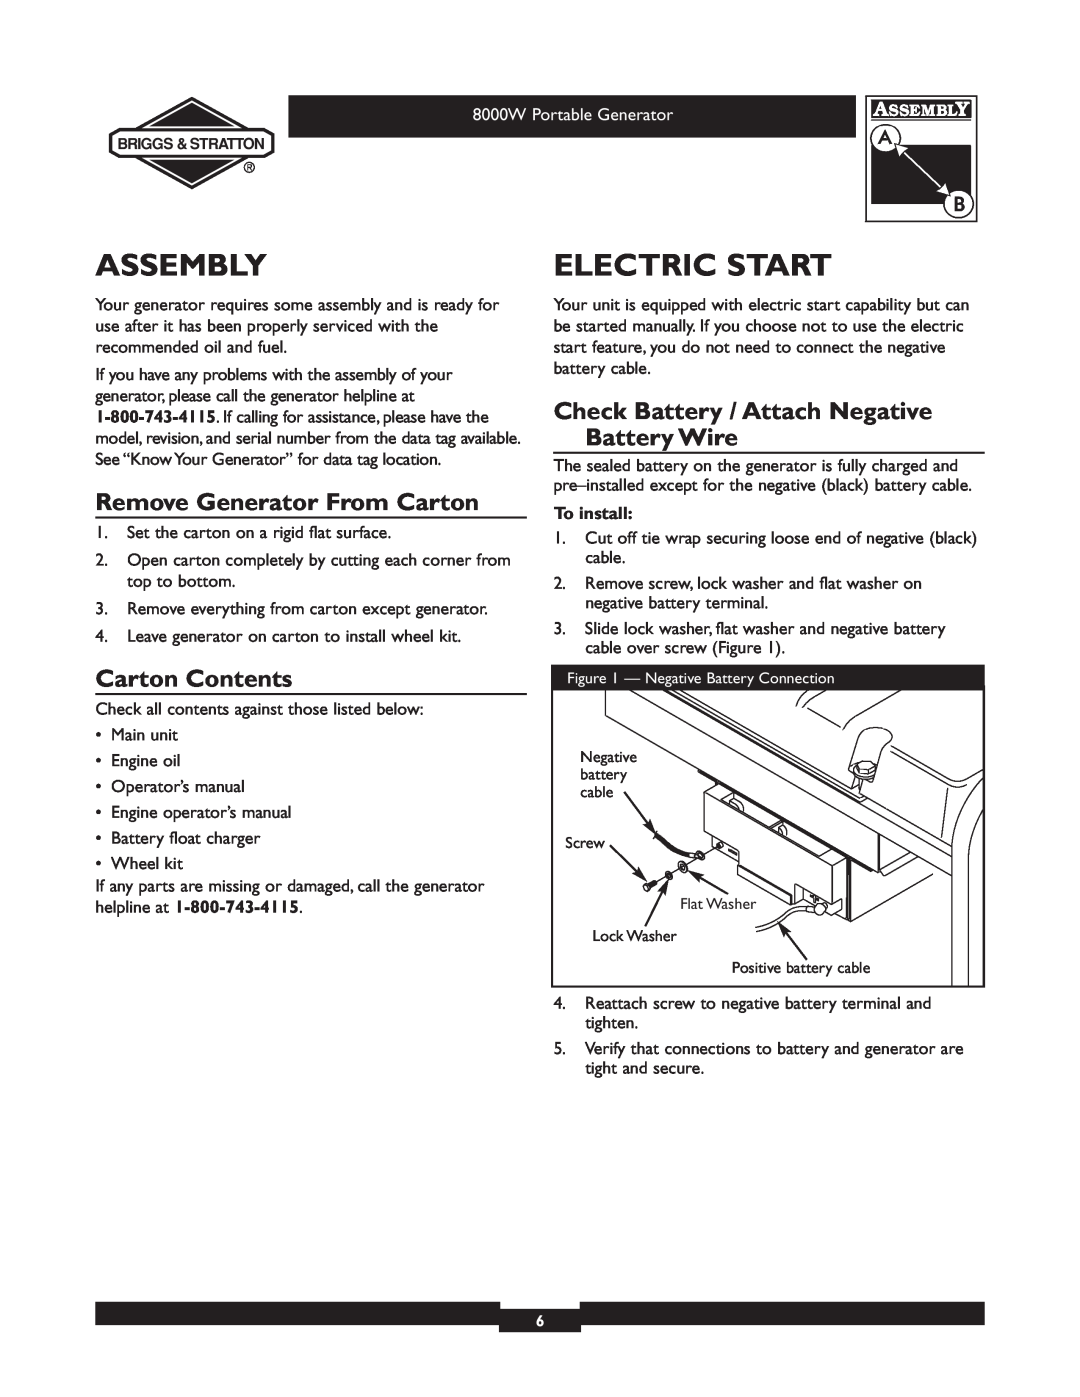 Briggs & Stratton 030210-2 manual Assembly, Electric Start, Remove Generator From Carton, Carton Contents 